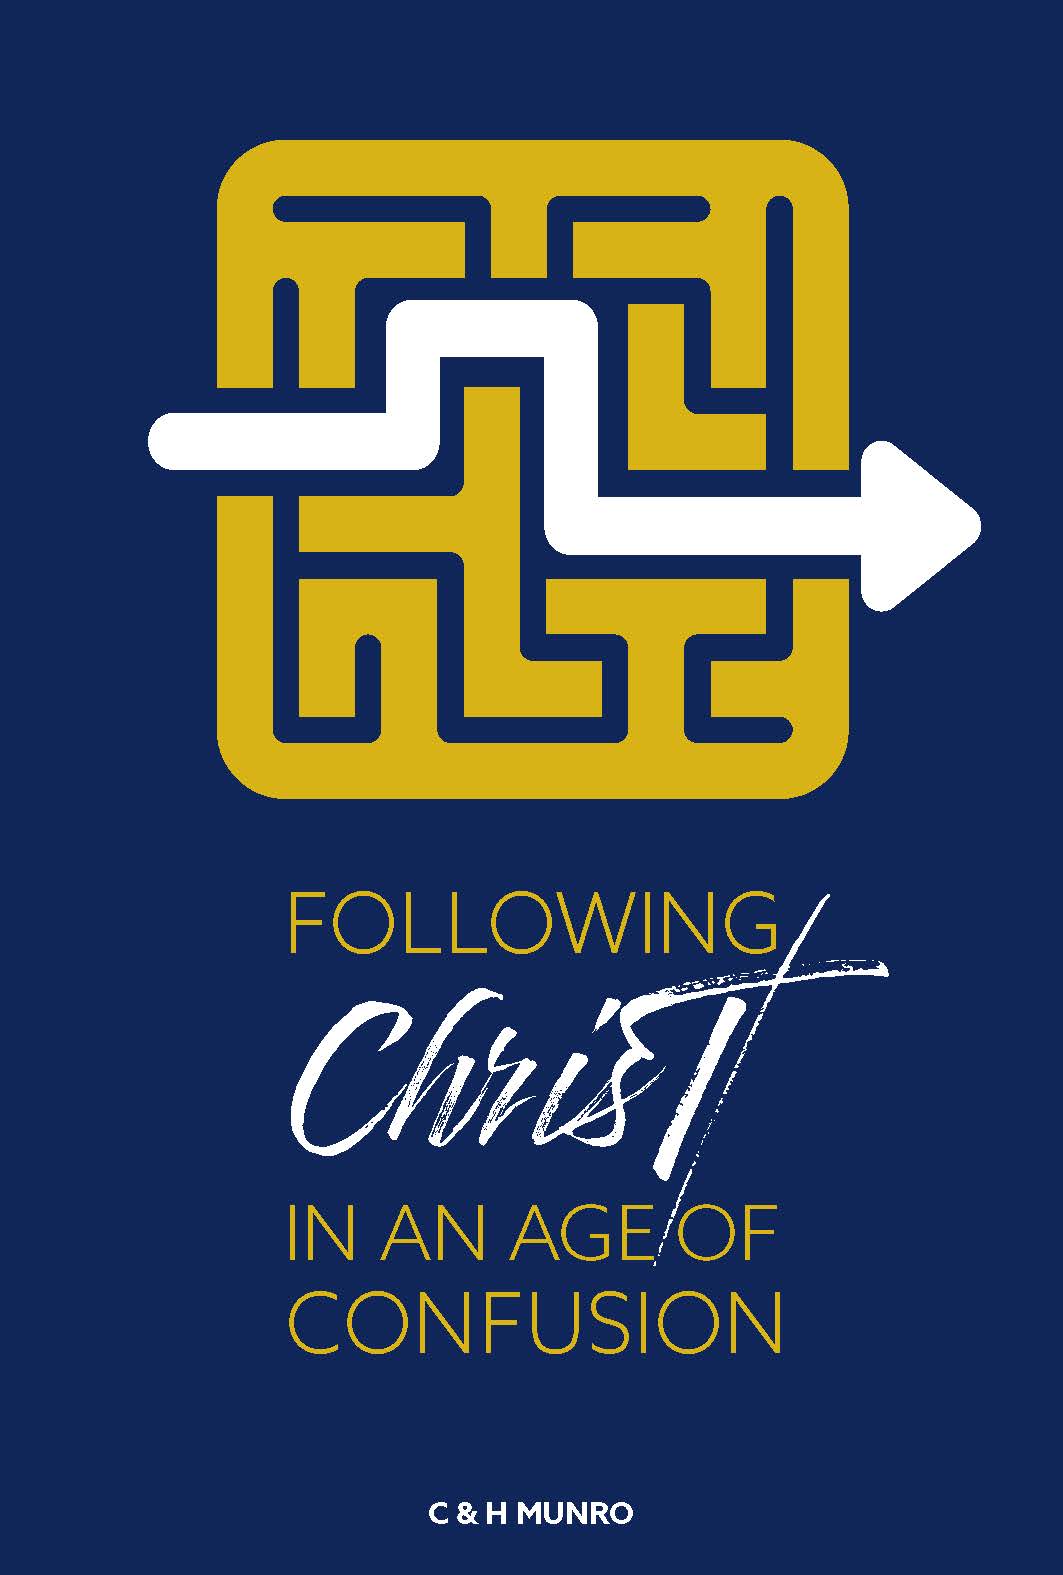 Image of Following Christ in an Age of Confusion other